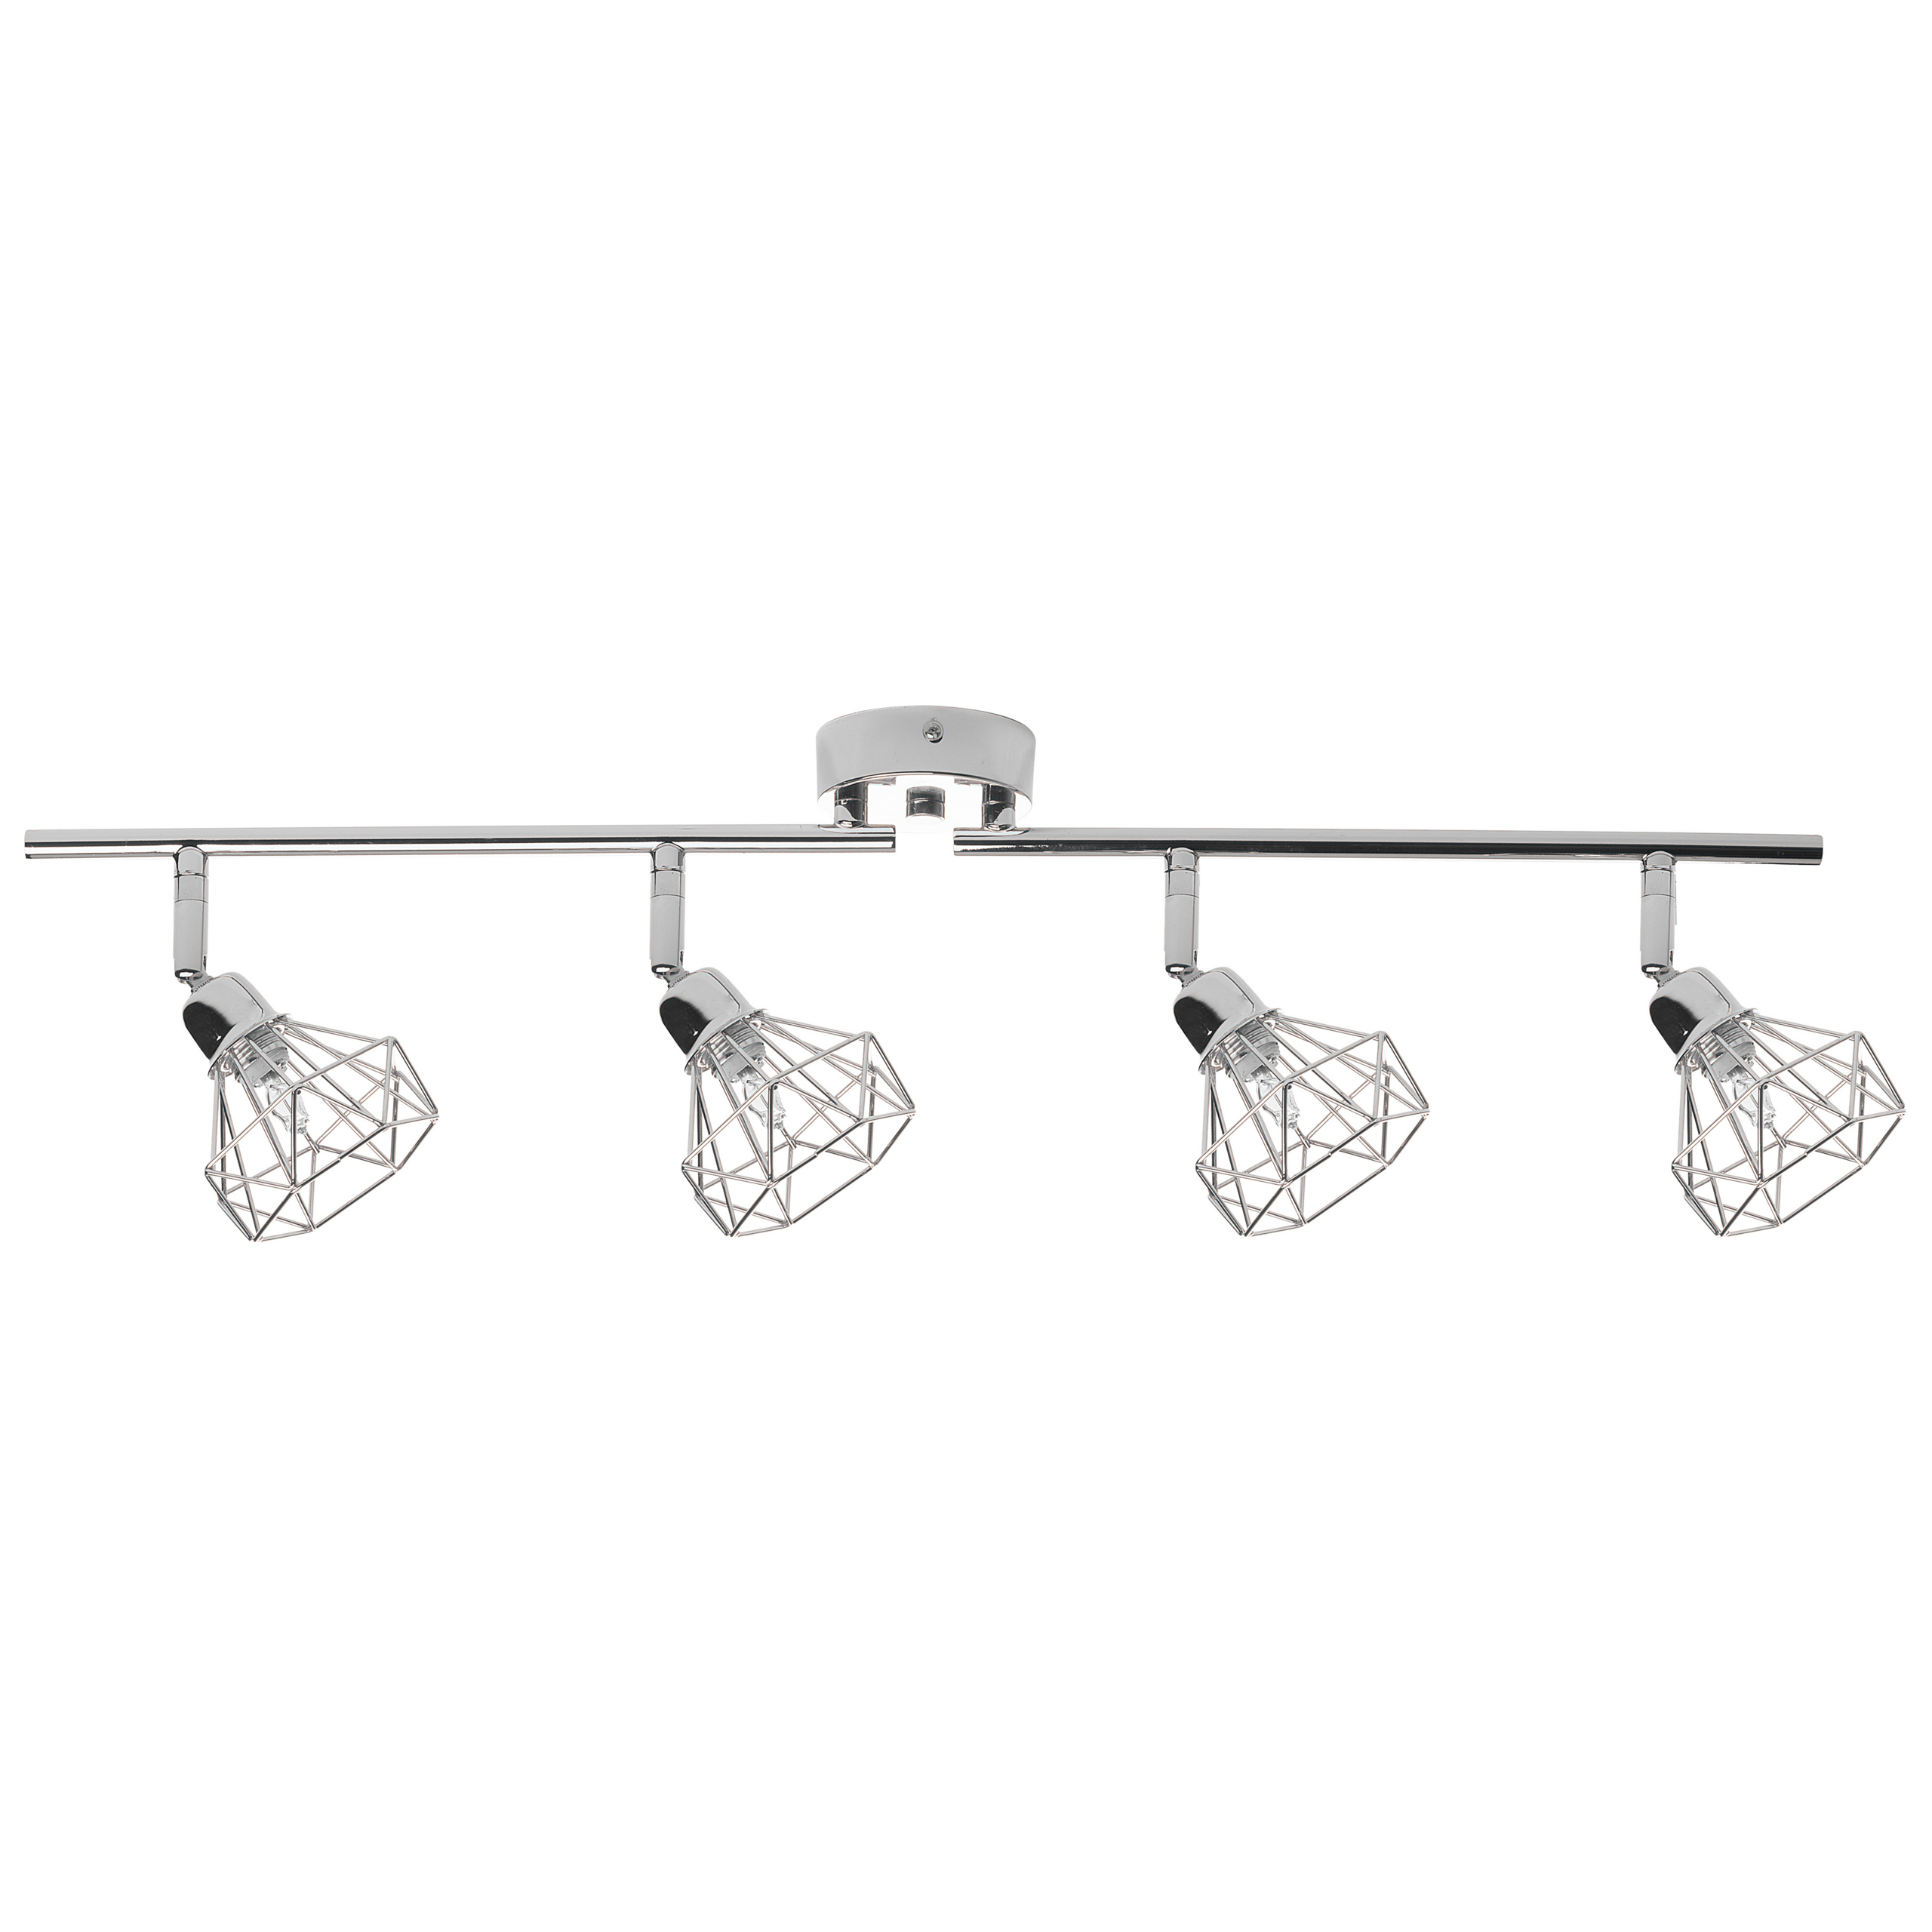 Beliani Ceiling Lamp Silver Metal 4 Light Cage Shades Adjustable Arms Modern